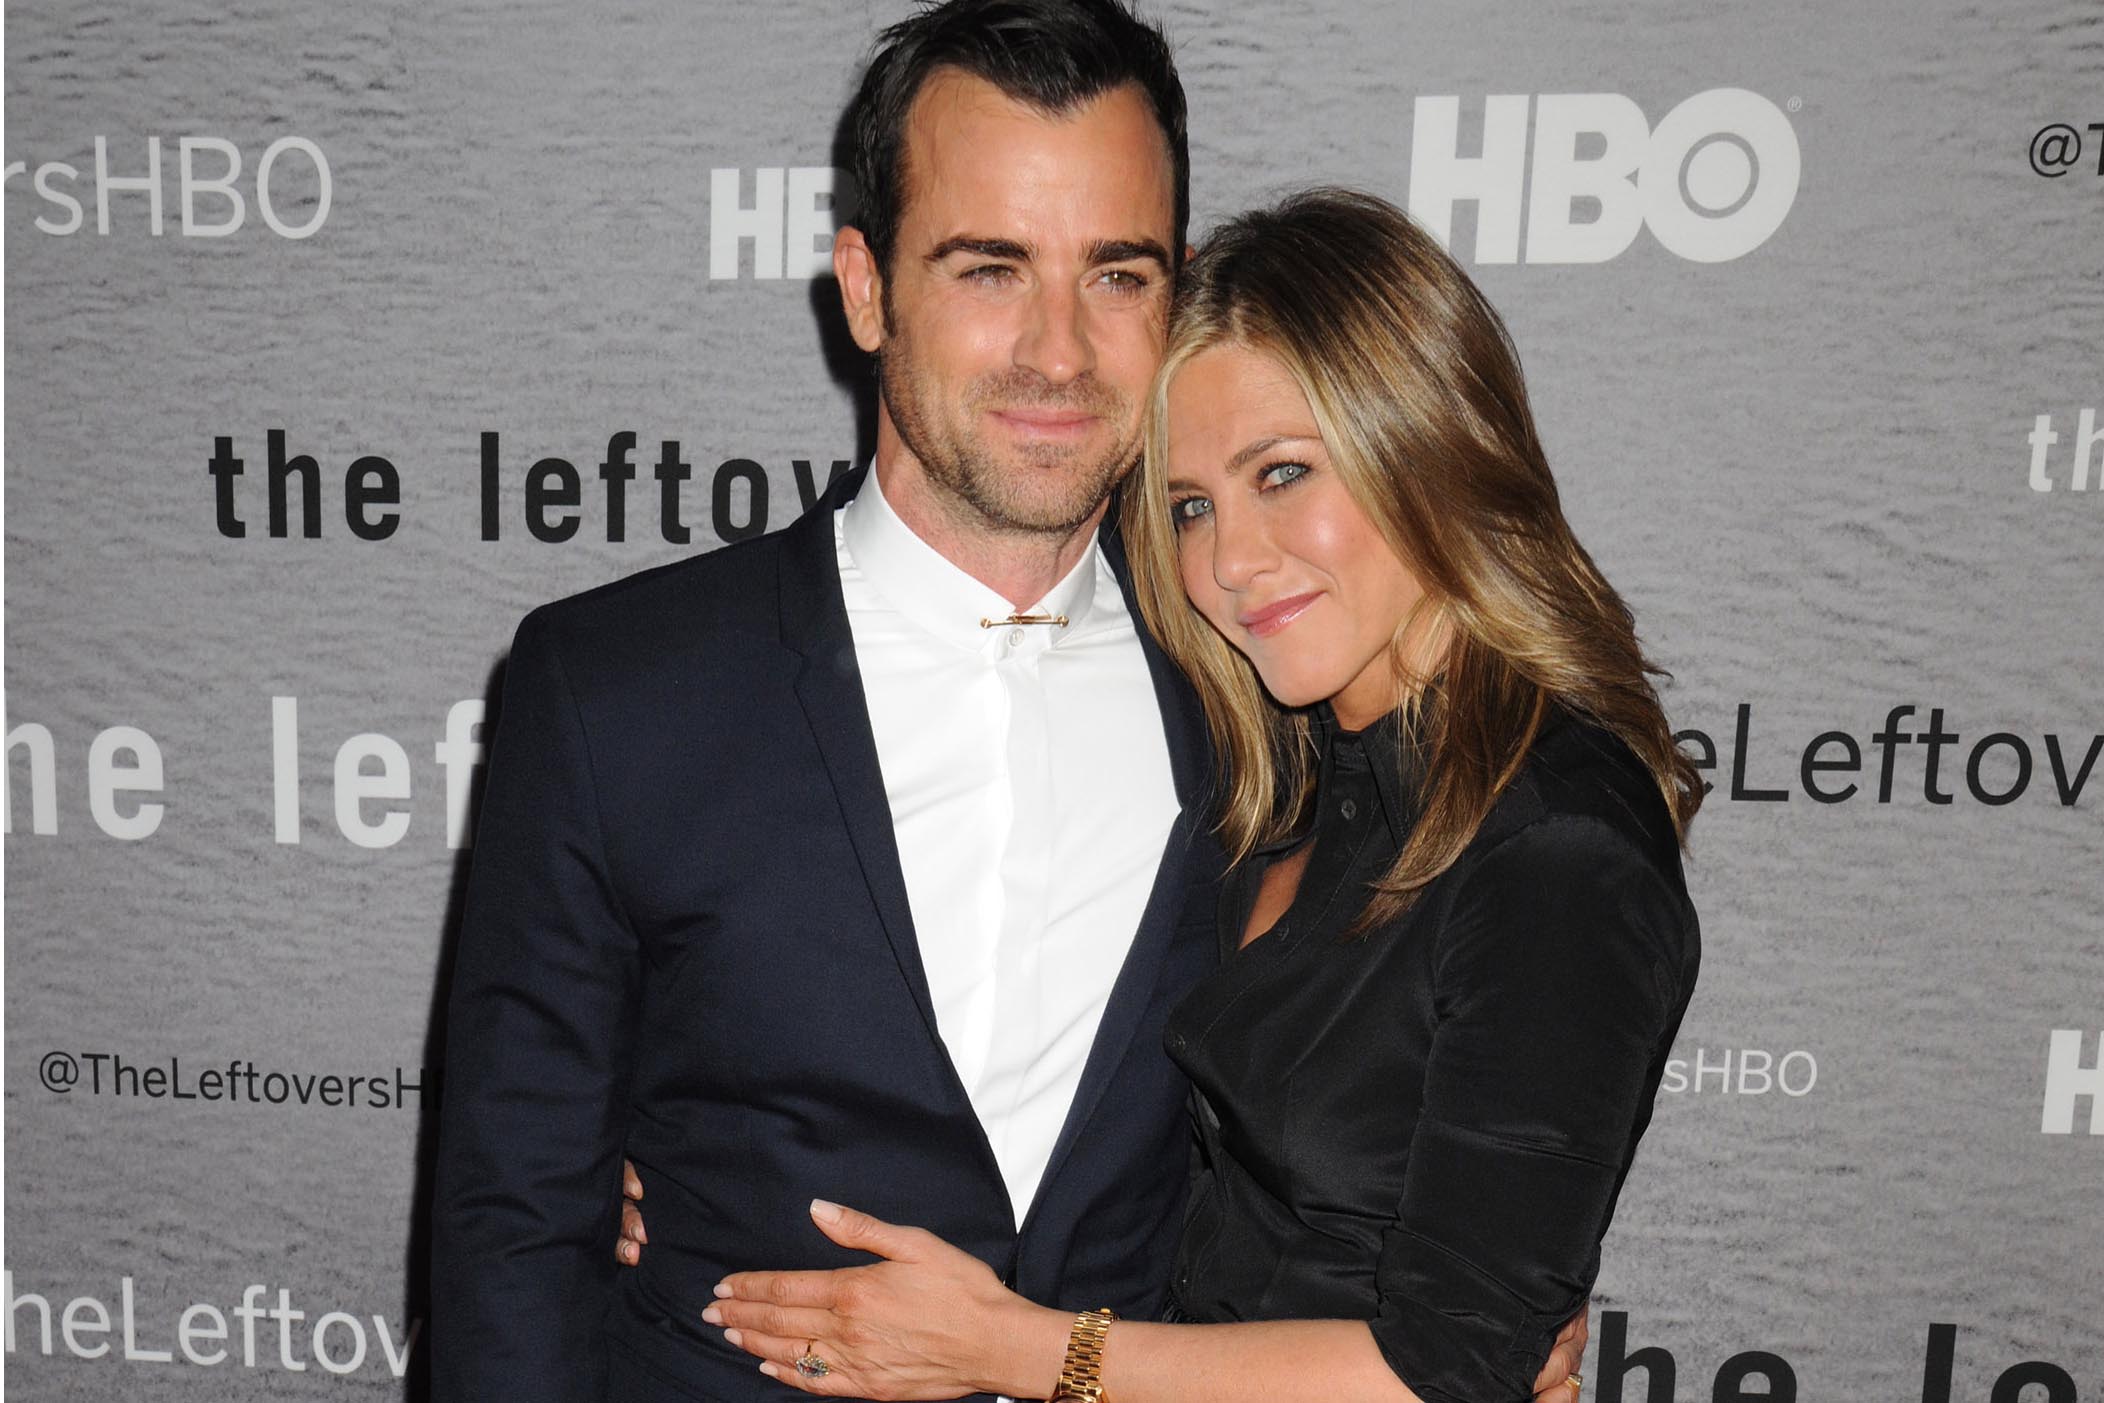 Consciously coupled lovebirds actors Justin Theroux (star of the series) and Jennifer Aniston arrive for the New York Premiere of HBO's new series "The Leftovers", held at the NYU Skirball Center in Greenwich Village in NYC Pictured: Justin Theroux and Jennifer Aniston Ref: SPL786039 230614 Picture by: Johns PKI/Splash News Splash News and Pictures Los Angeles: 310-821-2666 New York: 212-619-2666 London: 870-934-2666 photodesk@splashnews.com 